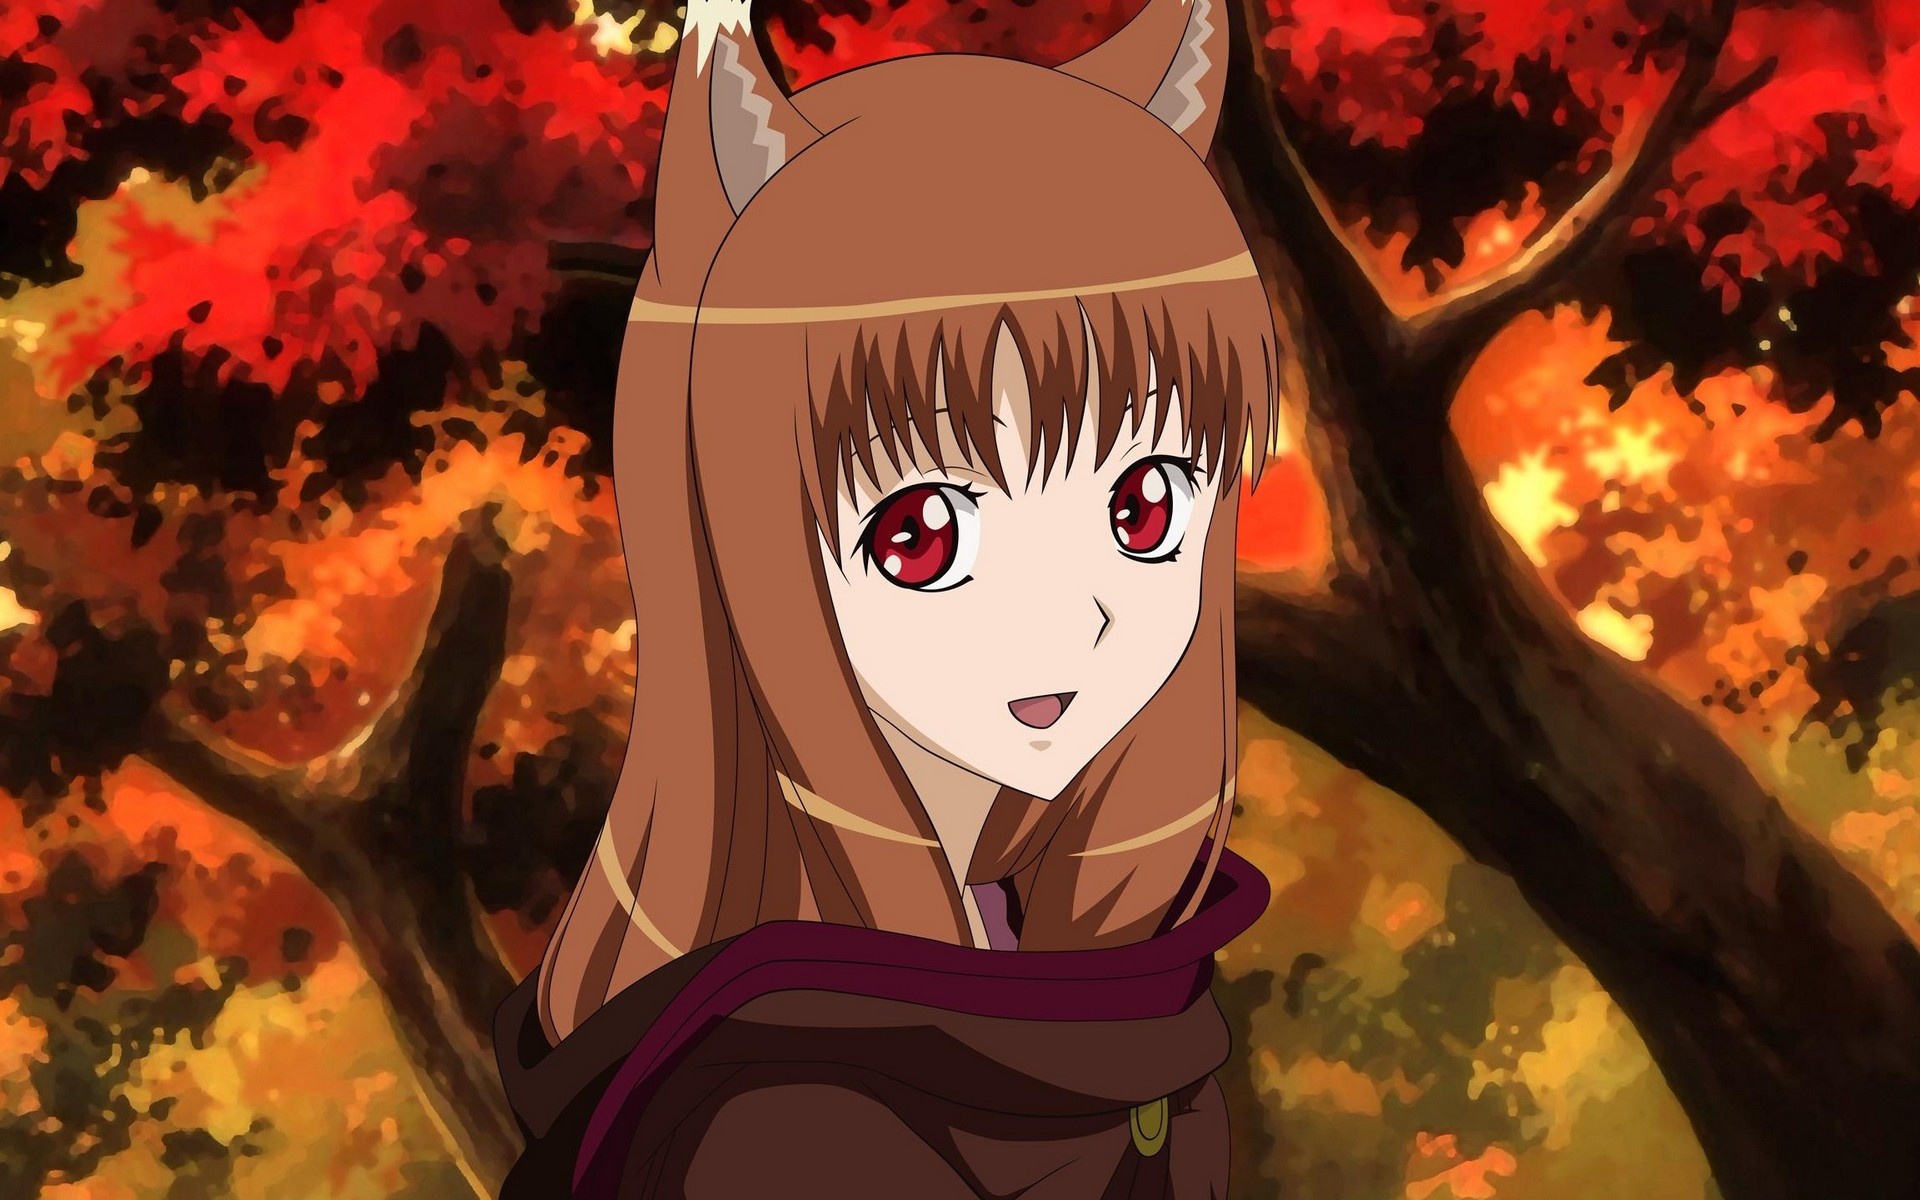 Spice and Wolf (Anime): A second OVA was released in April 2009. 1920x1200 HD Background.